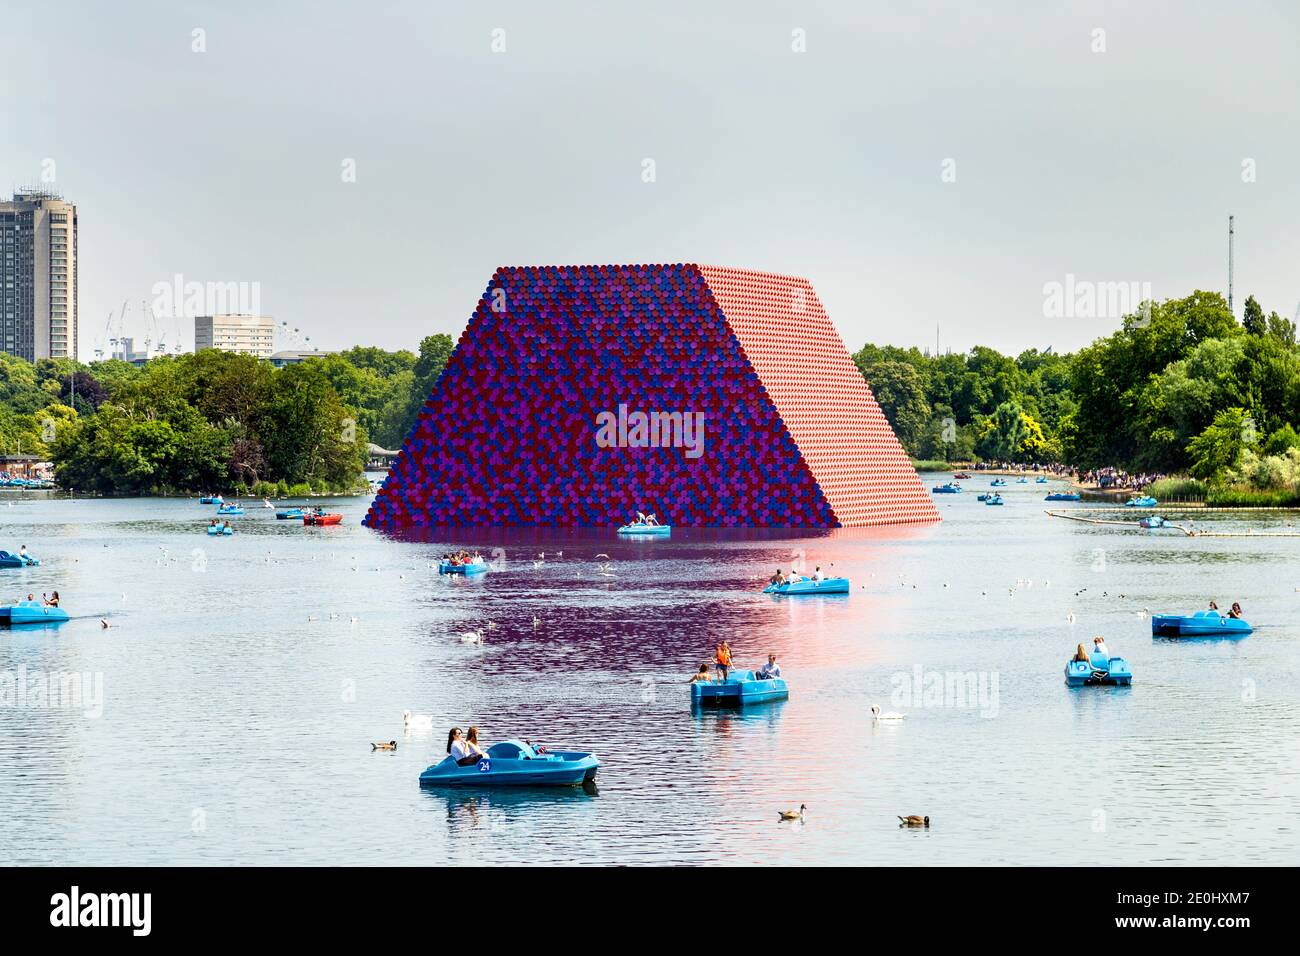 June 2018 - The Mastaba sculpture by Christo and Jeanne-Claude floating in the Serpentine Lake in Hyde Park, London, UK Stock Photo